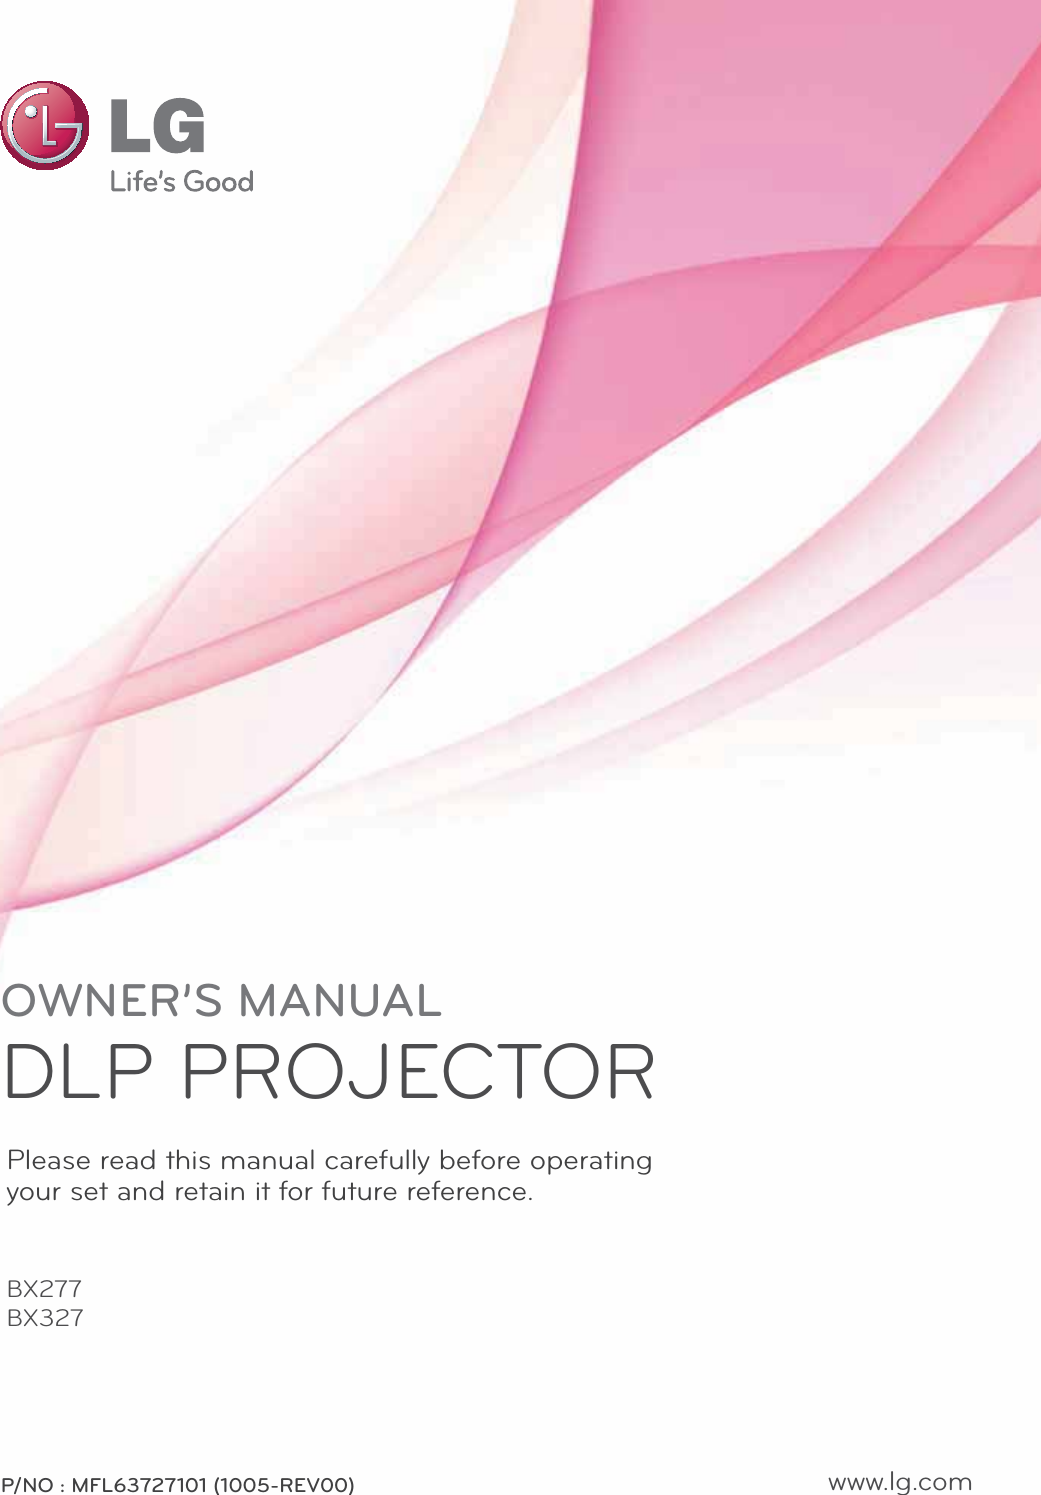 OWNER’S MANUALDLP PROJECTORBX277BX327Please read this manual carefully before operatingyour set and retain it for future reference.www.lg.comP/NO : MFL63727101 (1005-REV00)